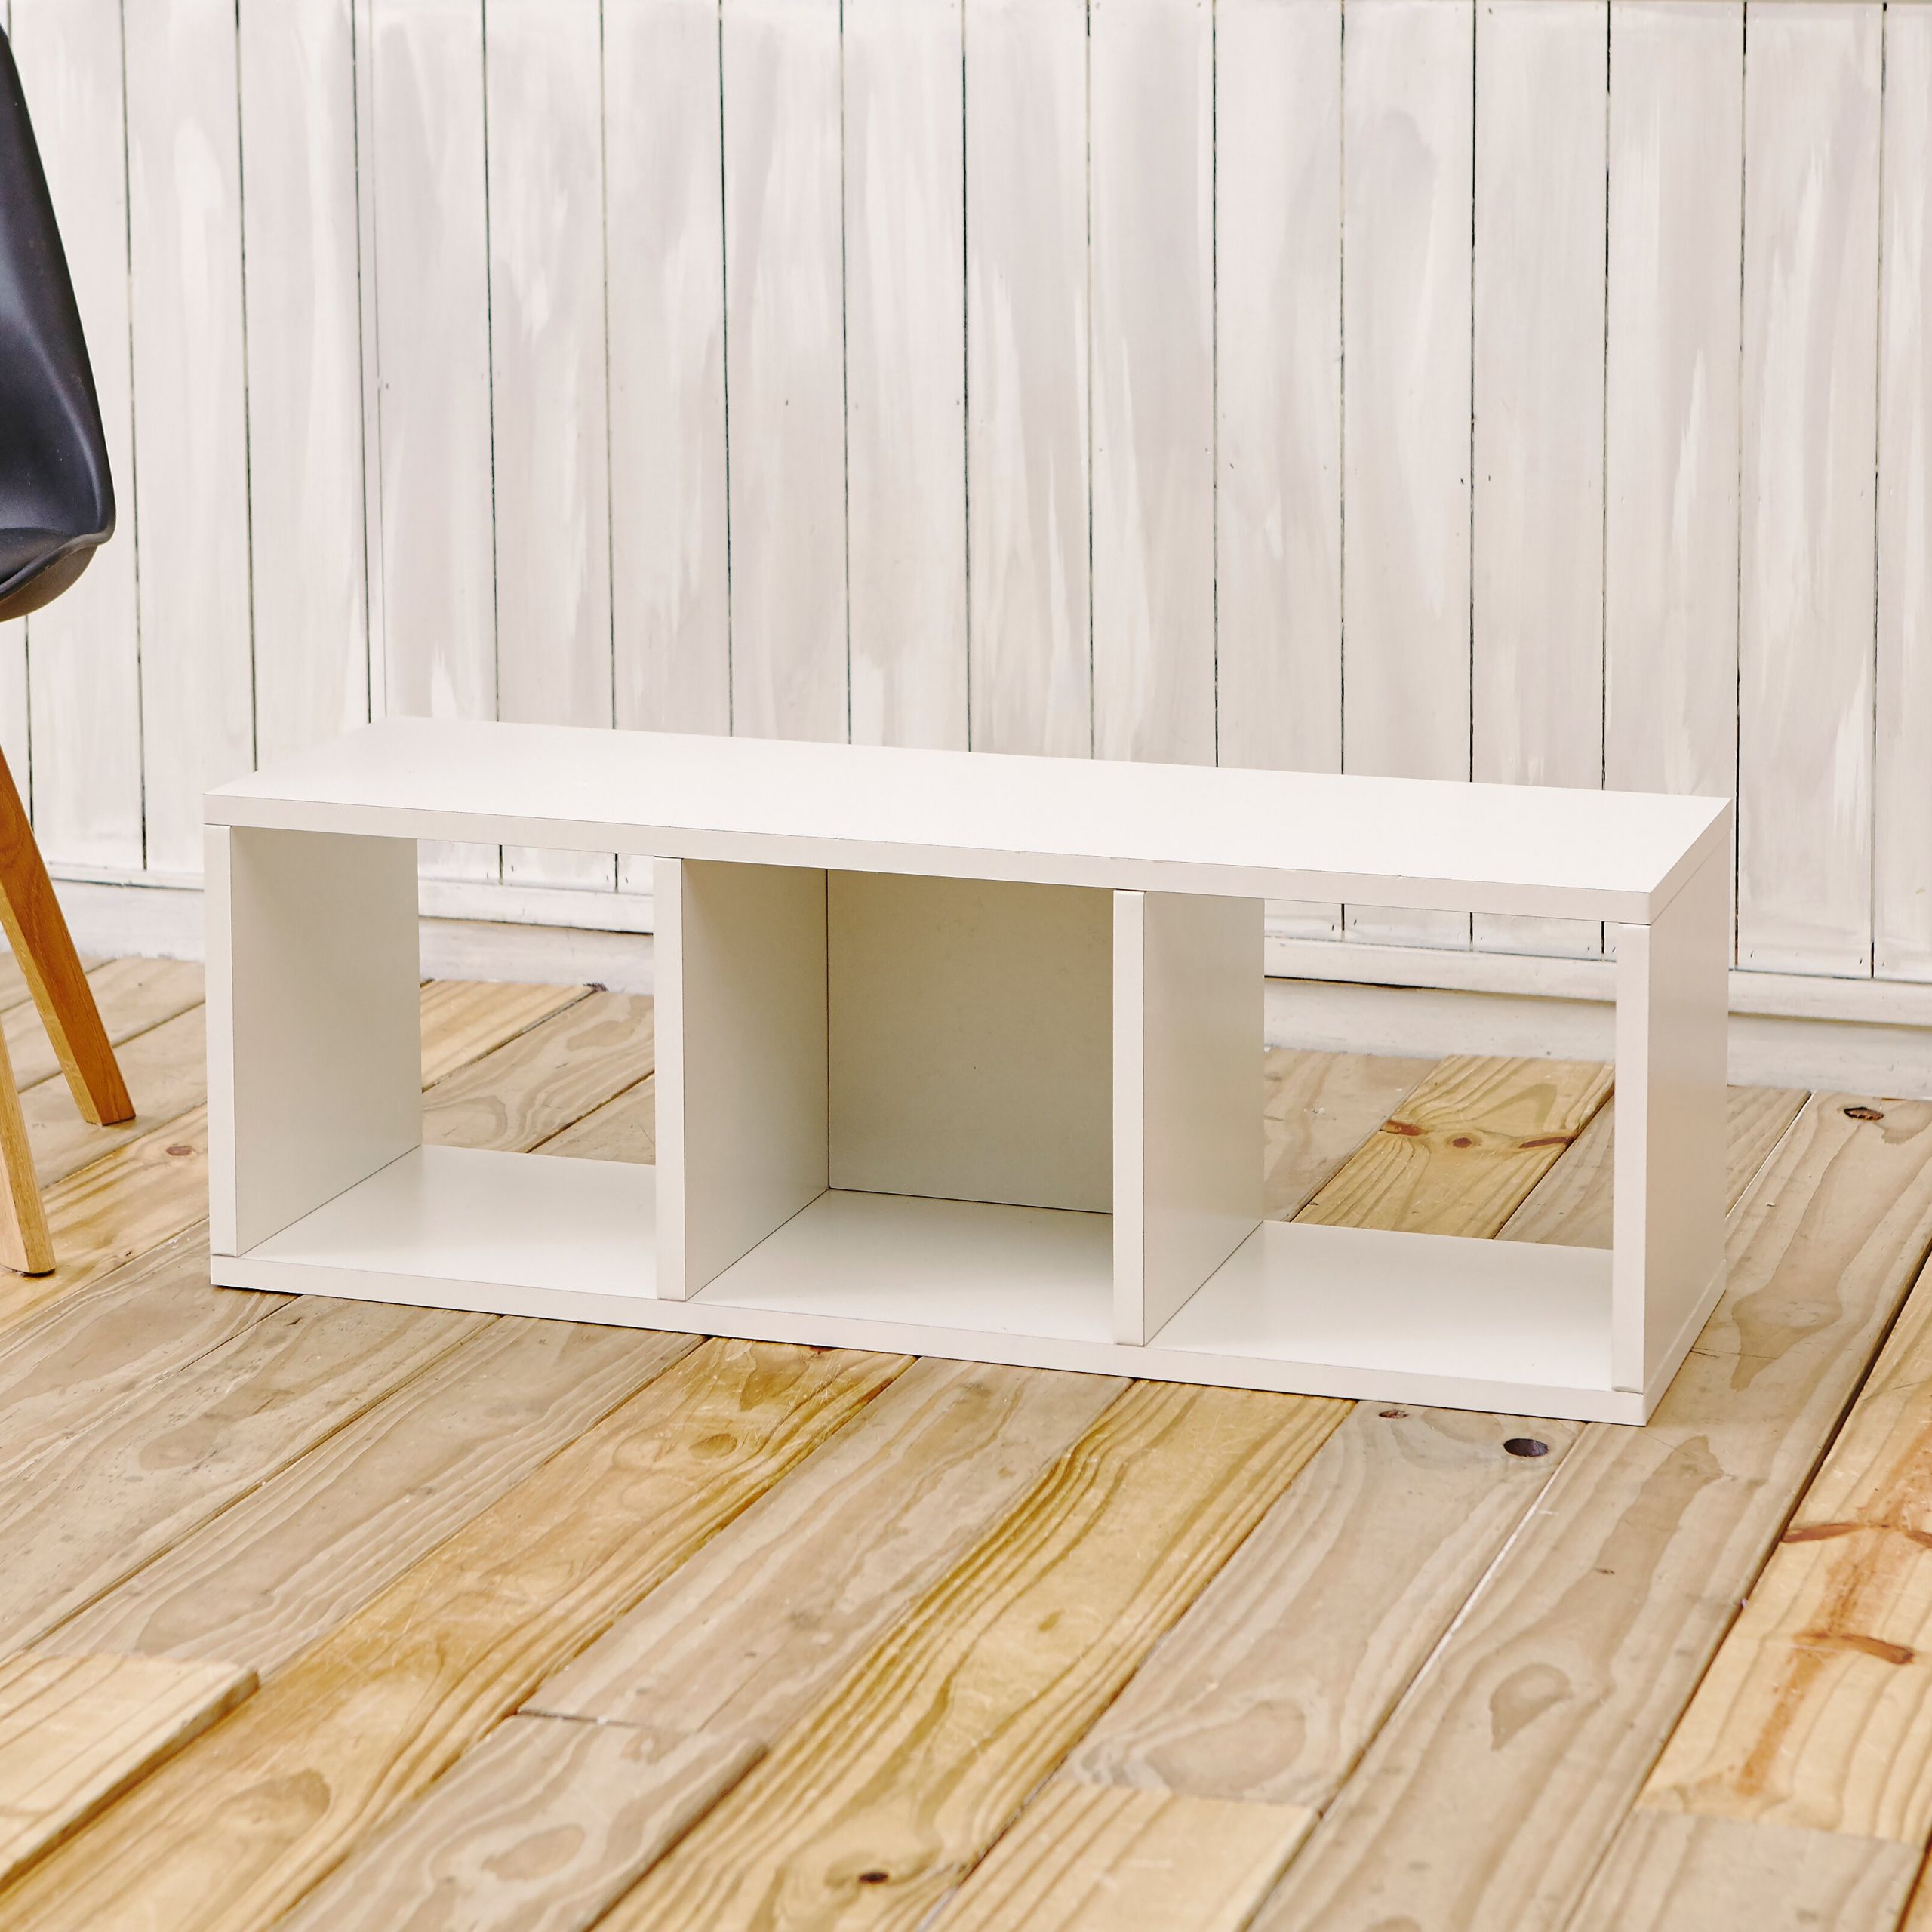 Cubby Storage Bench
 Way Basics Cozy Bench 12 8" Eco 3 Cubby Storage Bench and